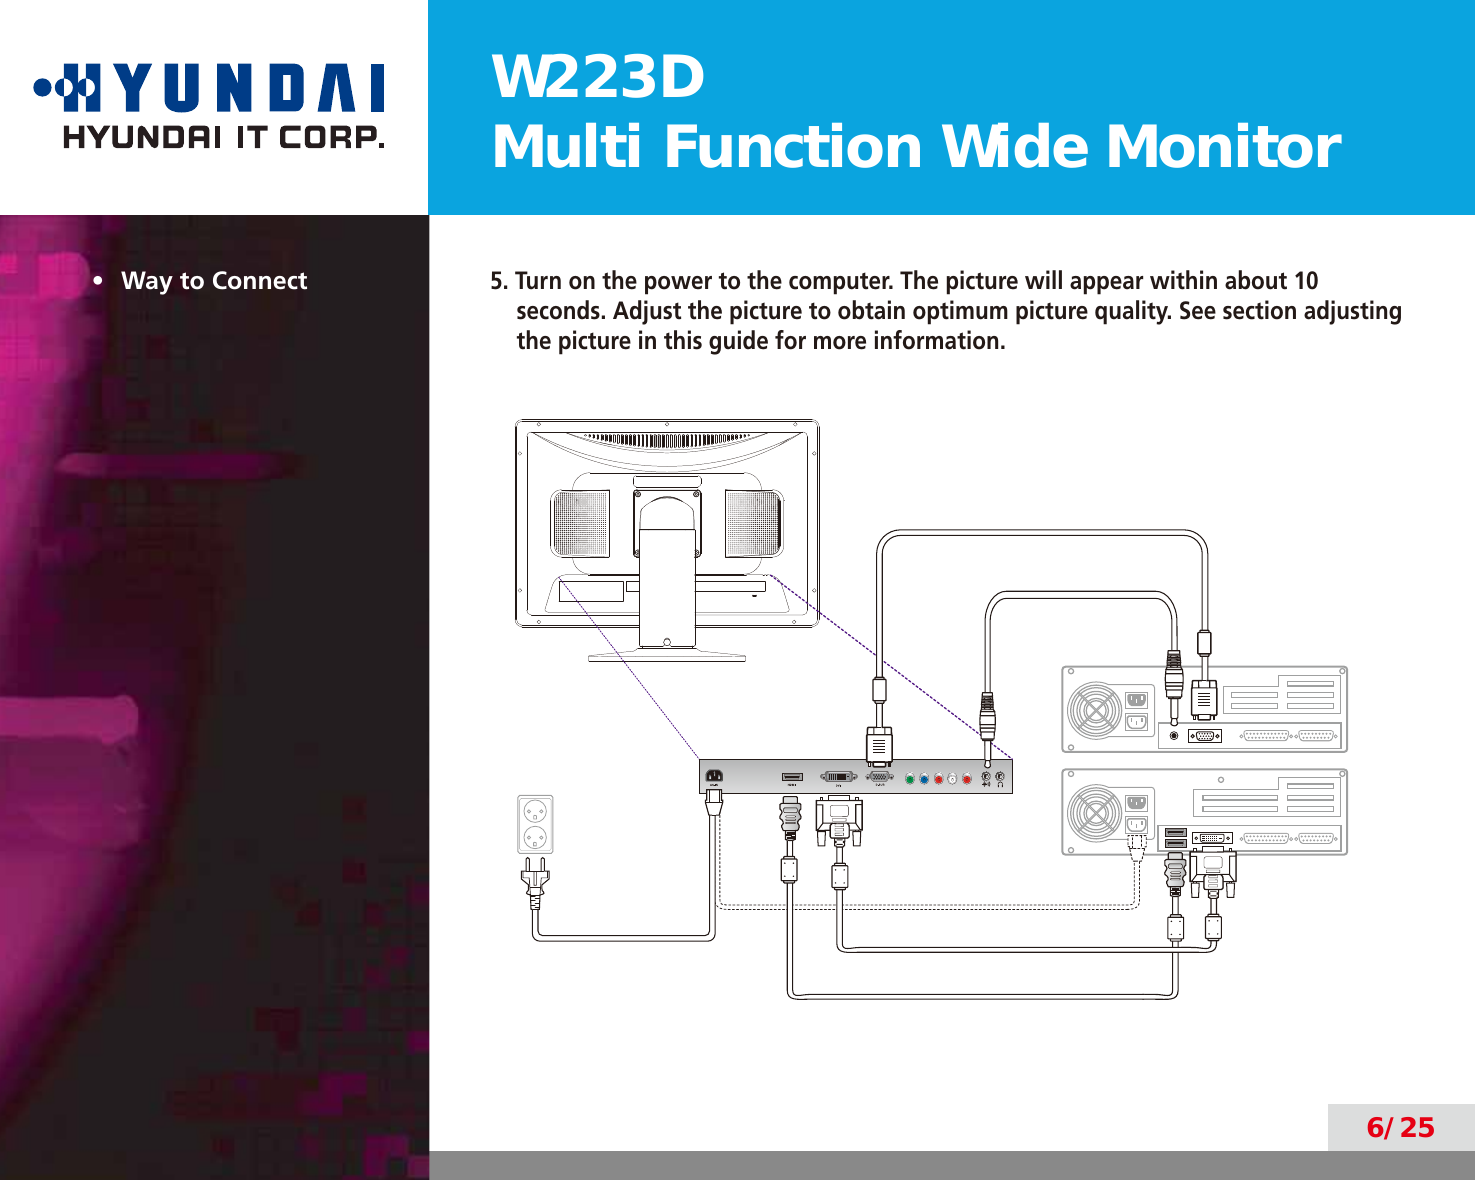 W223DMulti Function Wide Monitor6/25•  Way to Connect5. Turn on the power to the computer. The picture will appear within about 10 seconds. Adjust the picture to obtain optimum picture quality. See section adjusting the picture in this guide for more information.